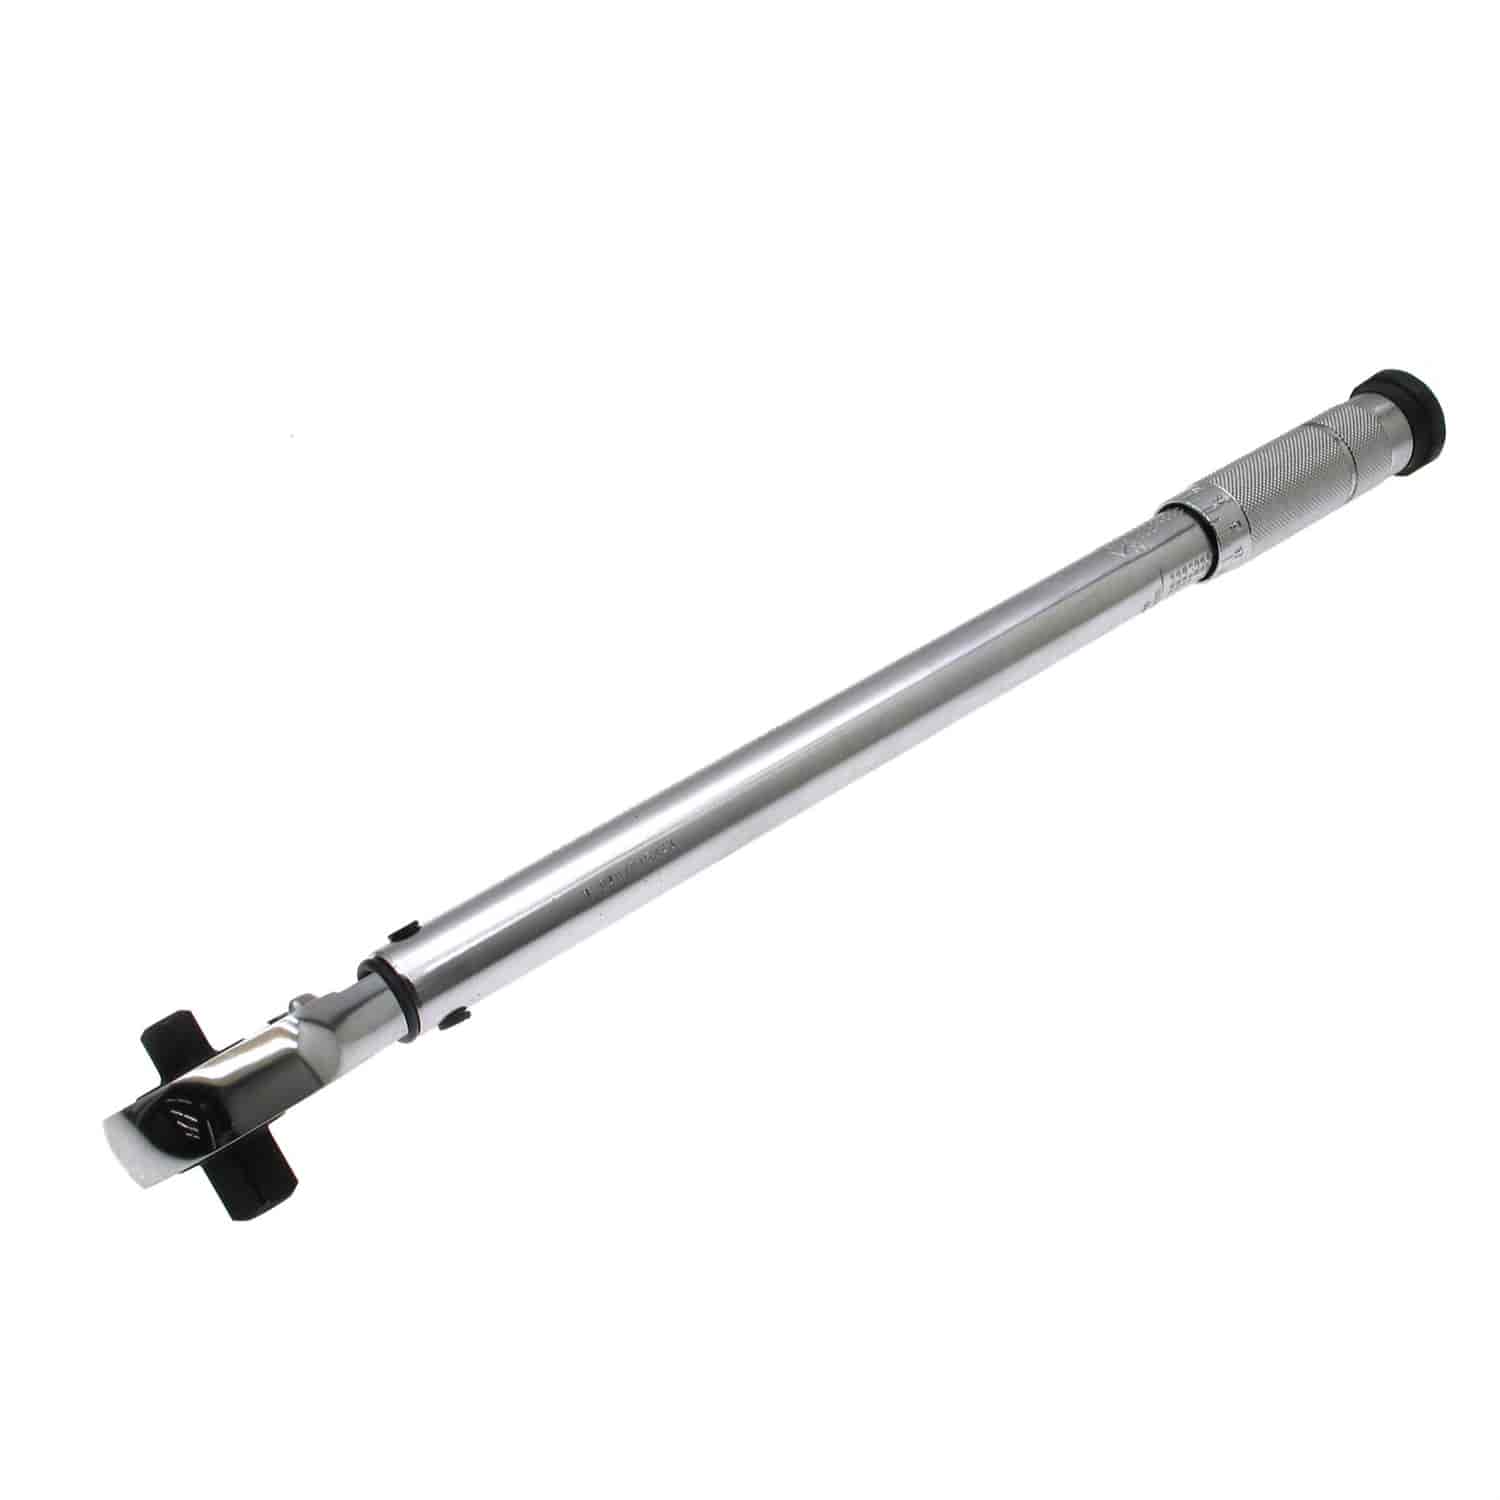 3/8&1/2 TORQUE WRENCH